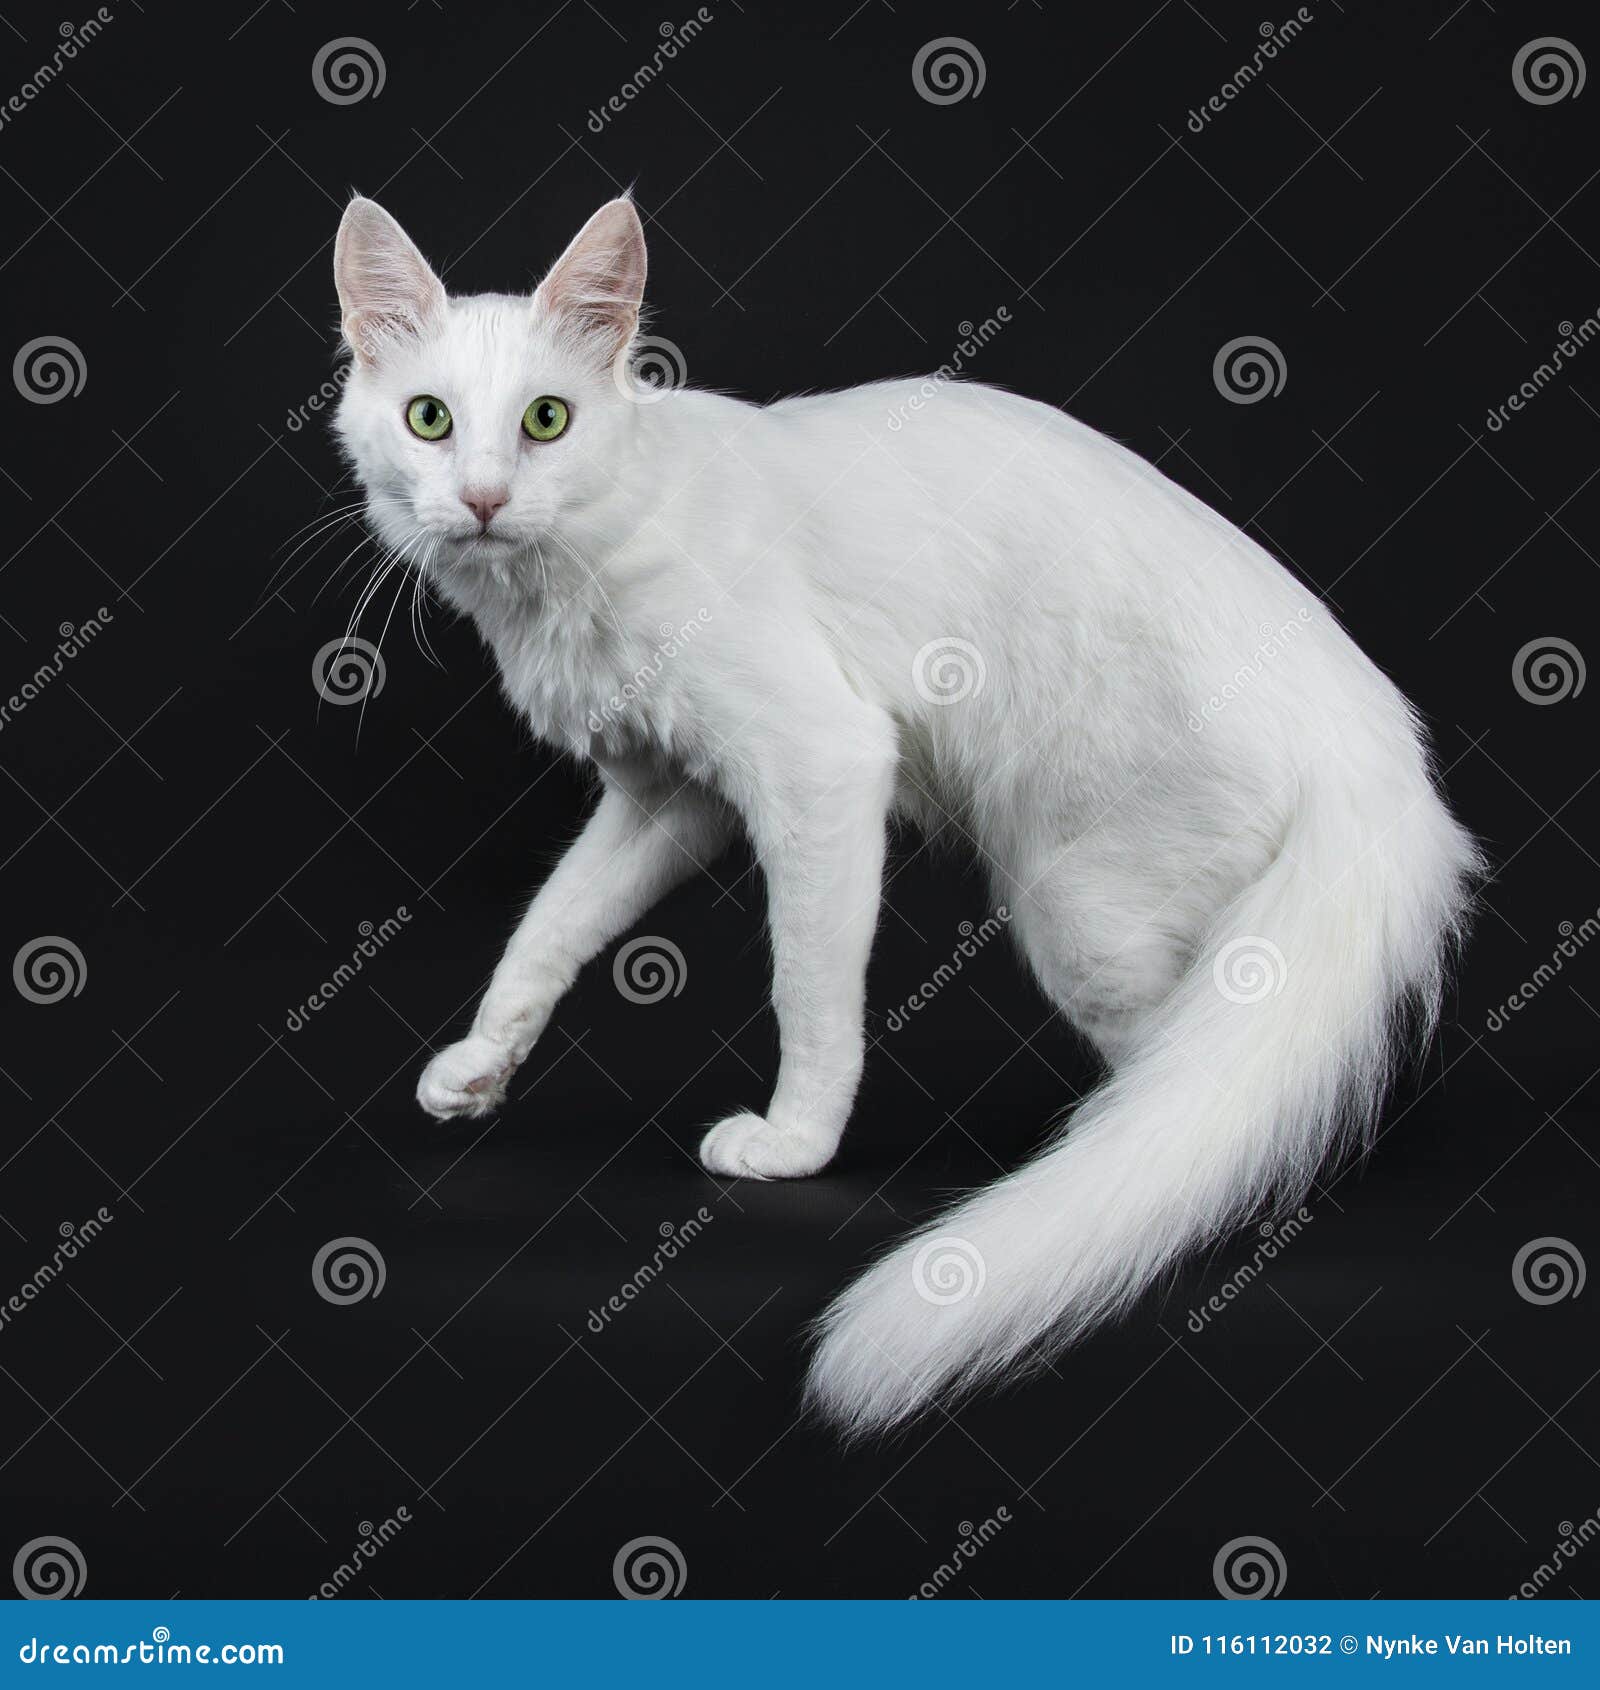 solid white turkish angora cat with green eyes walking side ways  on black background looking straight in camera with tail